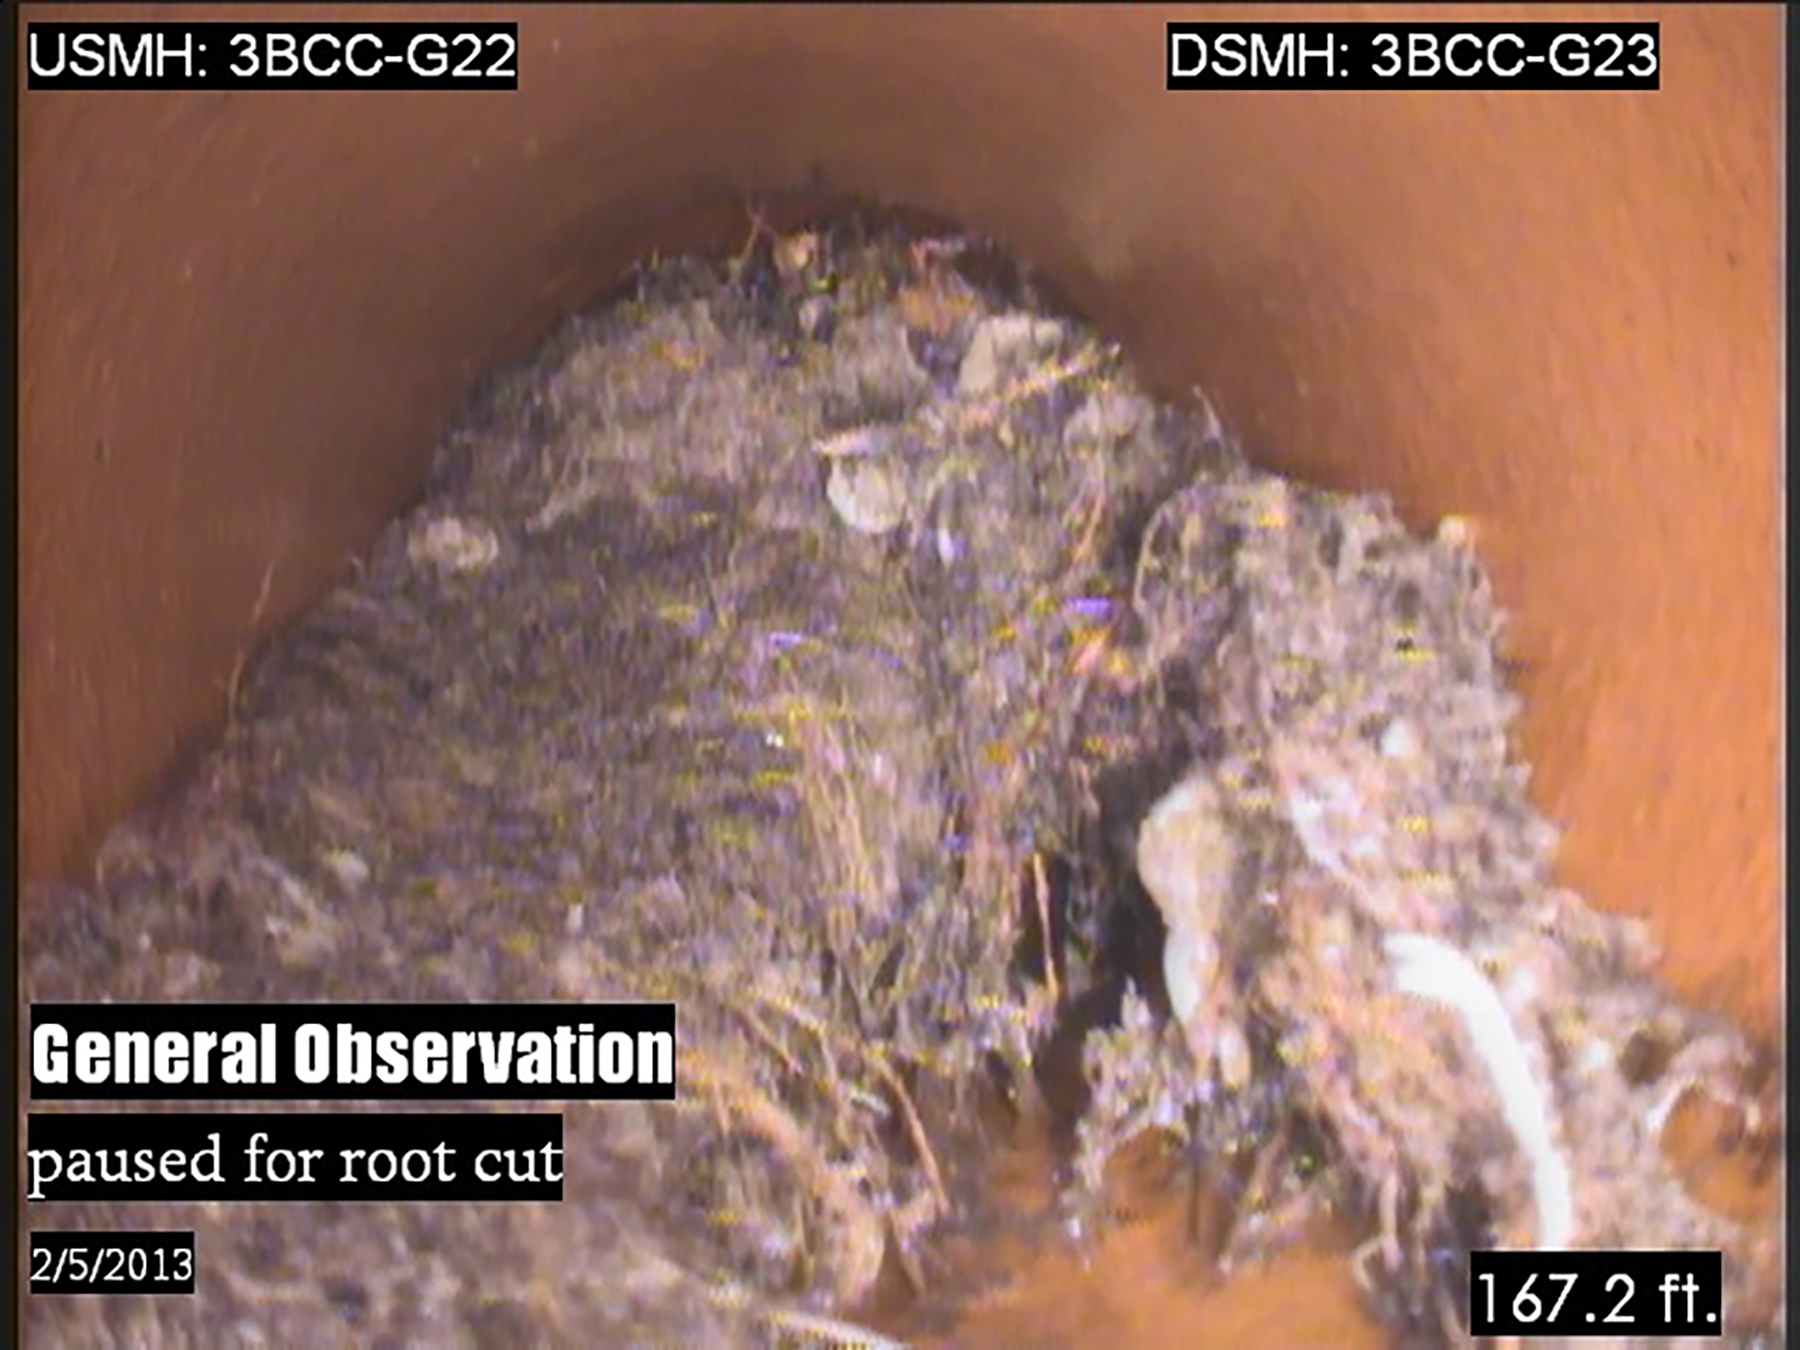 Image of inside the sewer from a closed-circuit TV video.